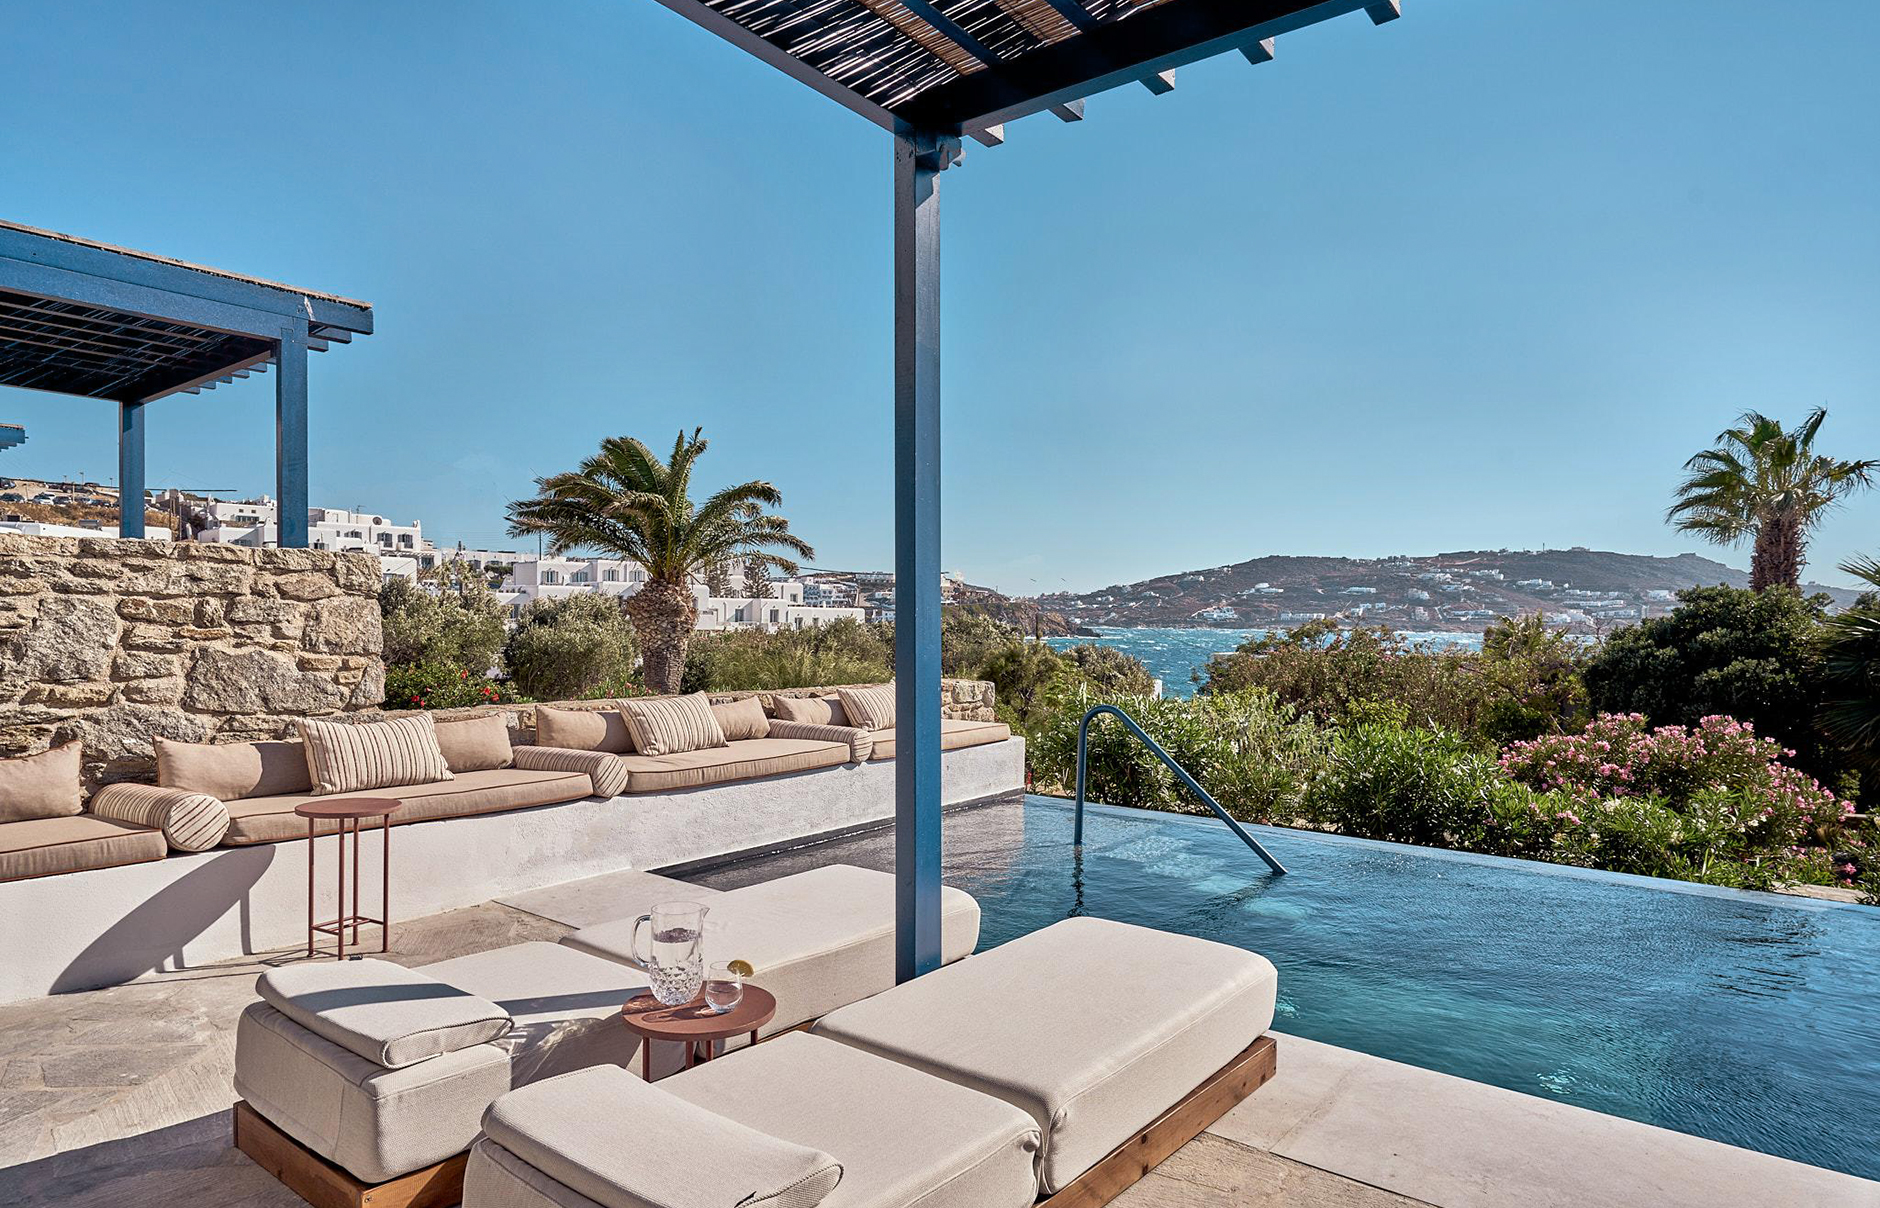 Mykonos Theoxenia Boutique Hotel, Mykonos, Greece. Hotel Review by TravelPlusStyle. © Mykonos Theoxenia